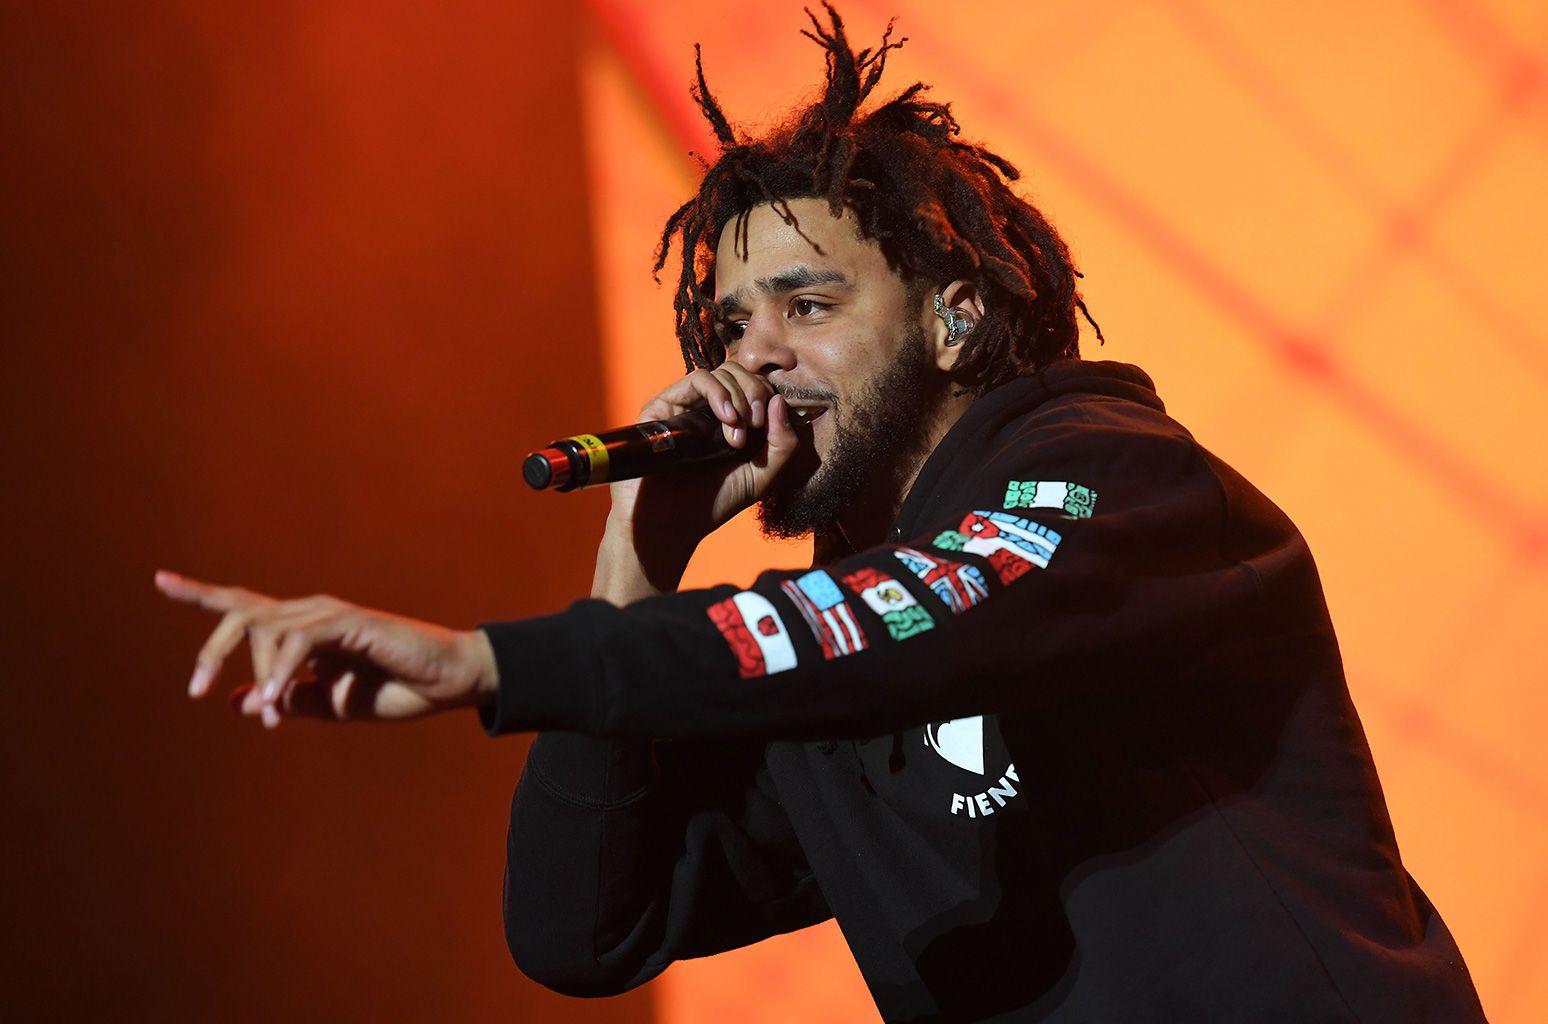 J. Cole closes his tour with a memorable performance at TD Garden